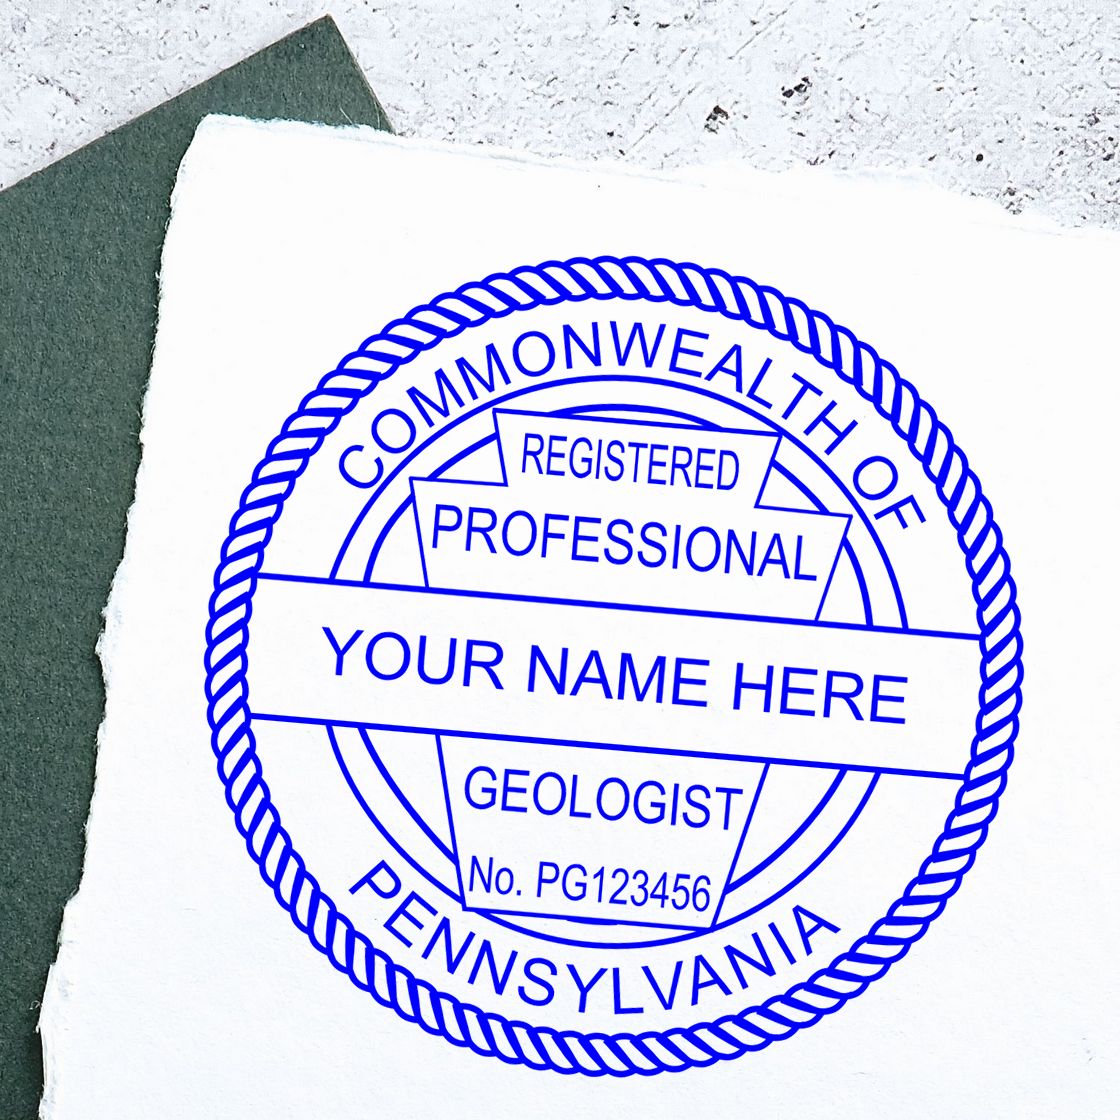 This paper is stamped with a sample imprint of the Self-Inking Pennsylvania Geologist Stamp, signifying its quality and reliability.